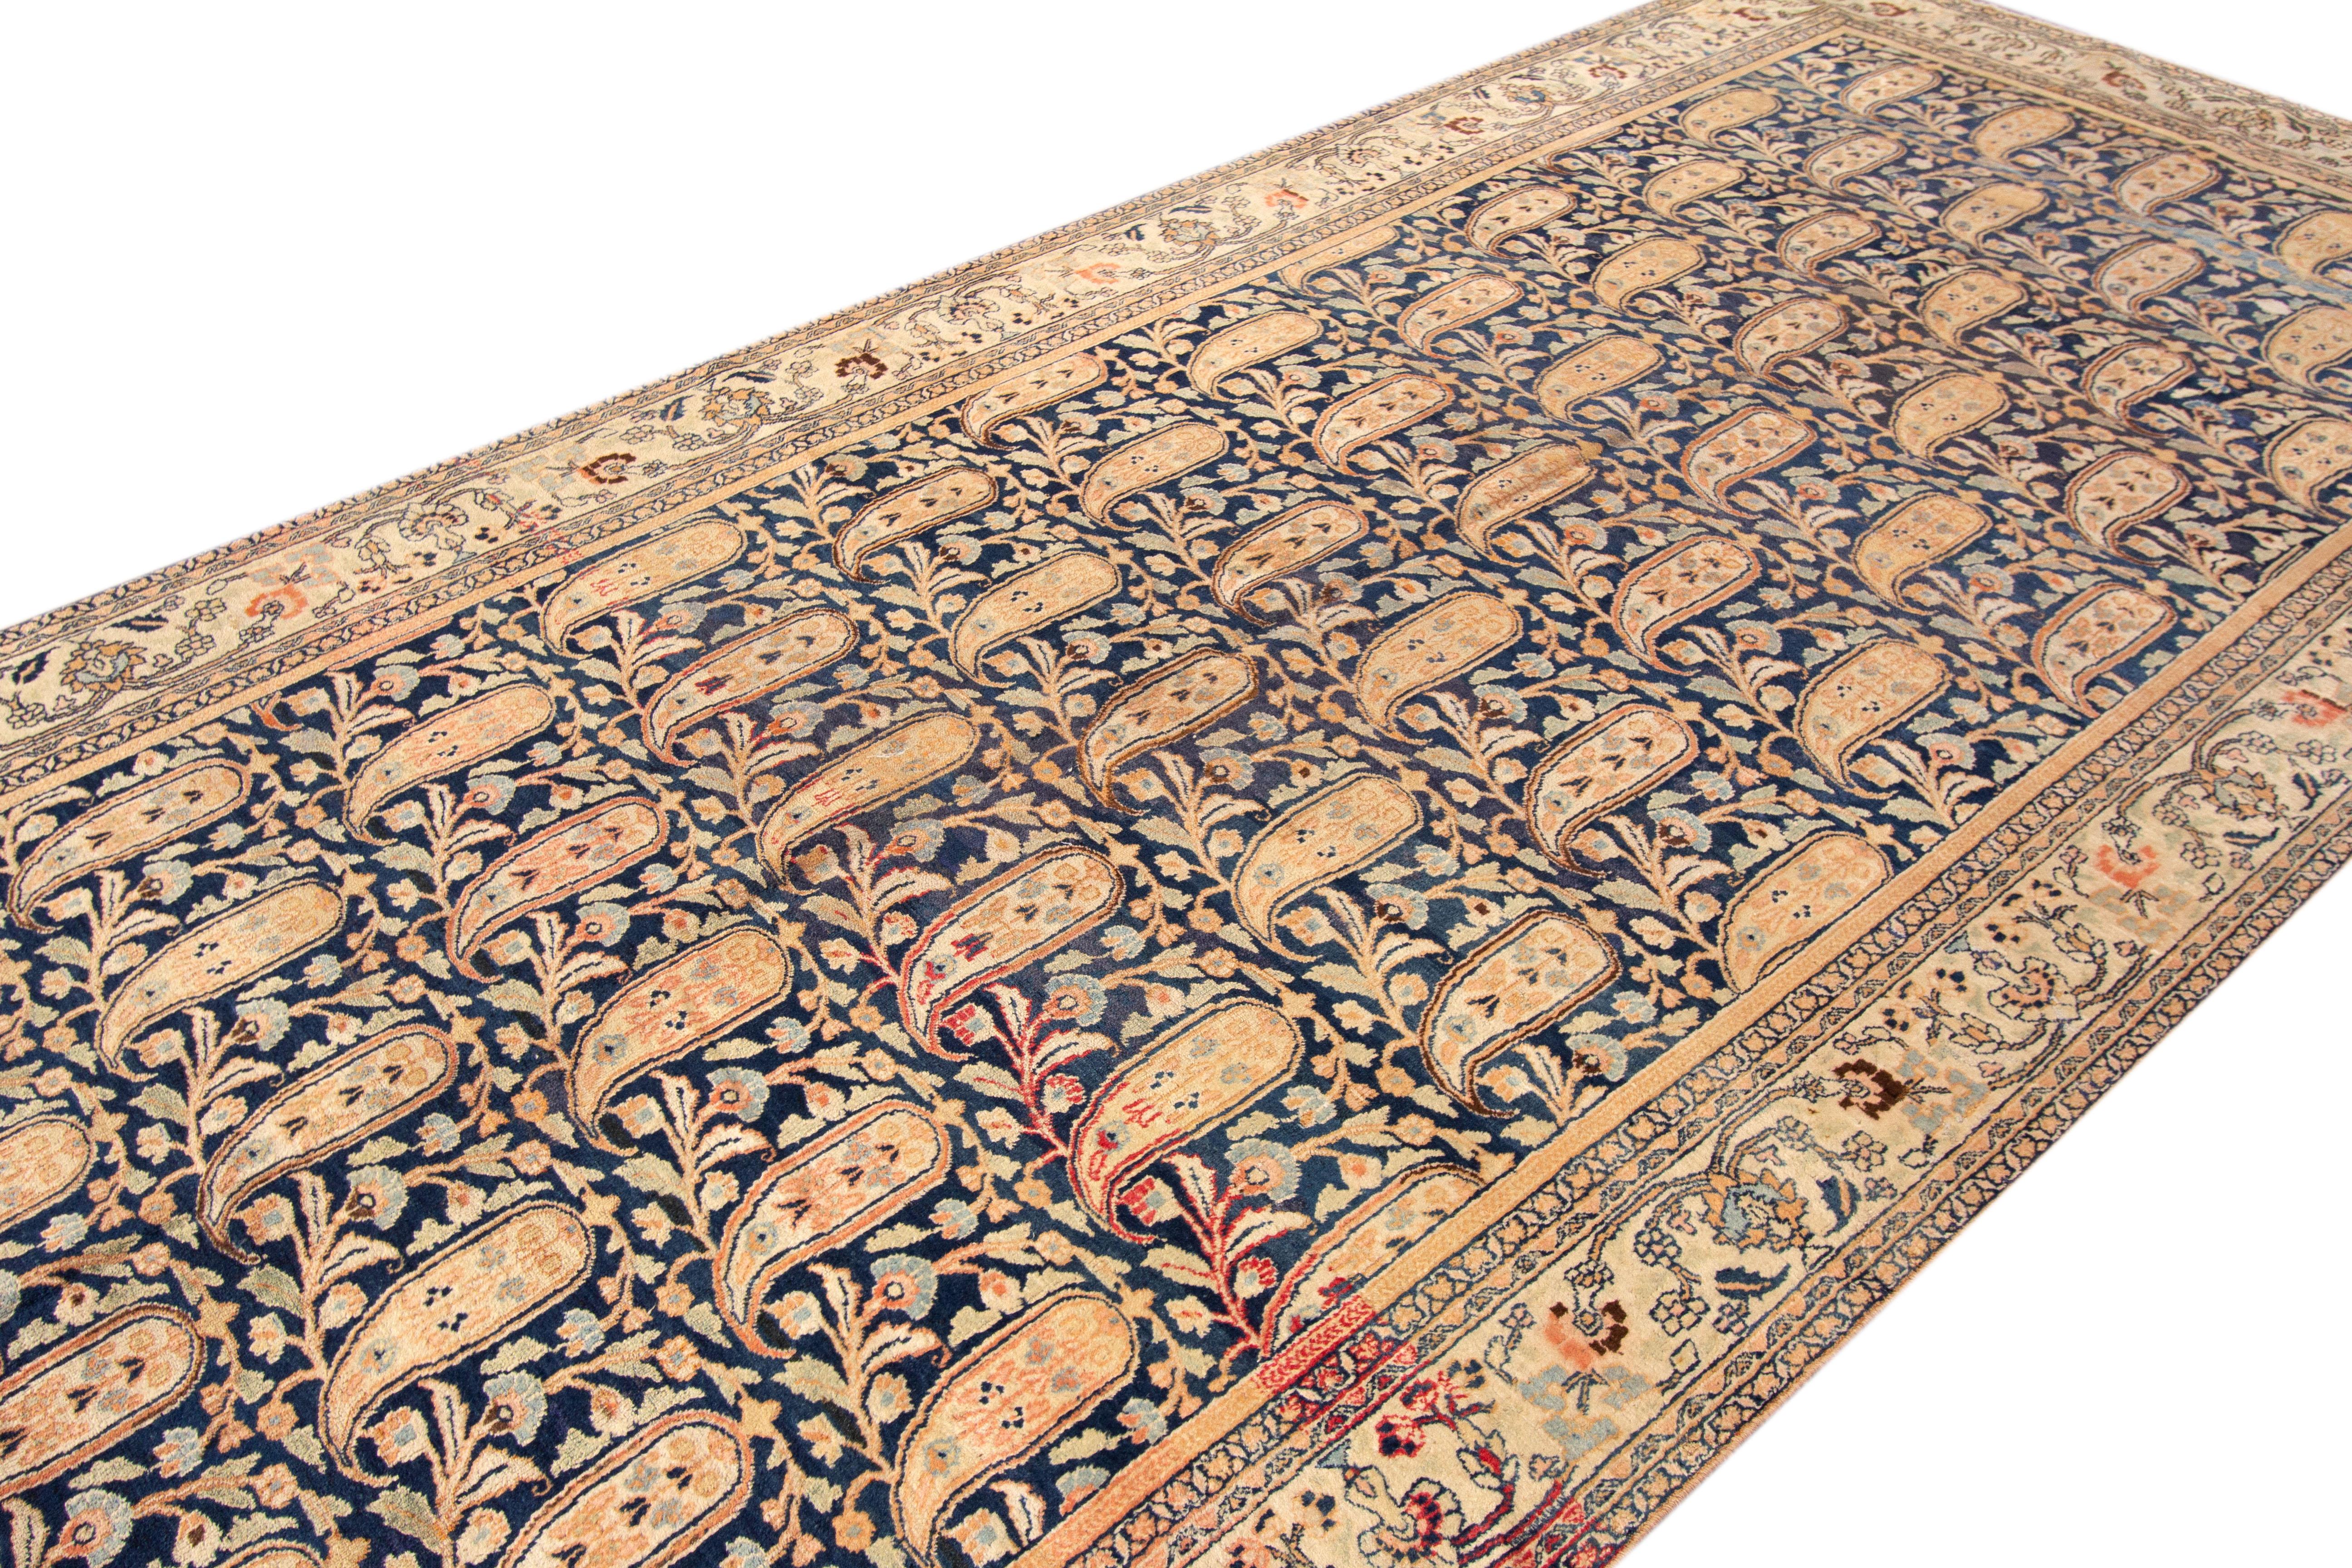 An antique Mashad gallery rug with an all over floral bayleaf motif. This rug measures at 6'6